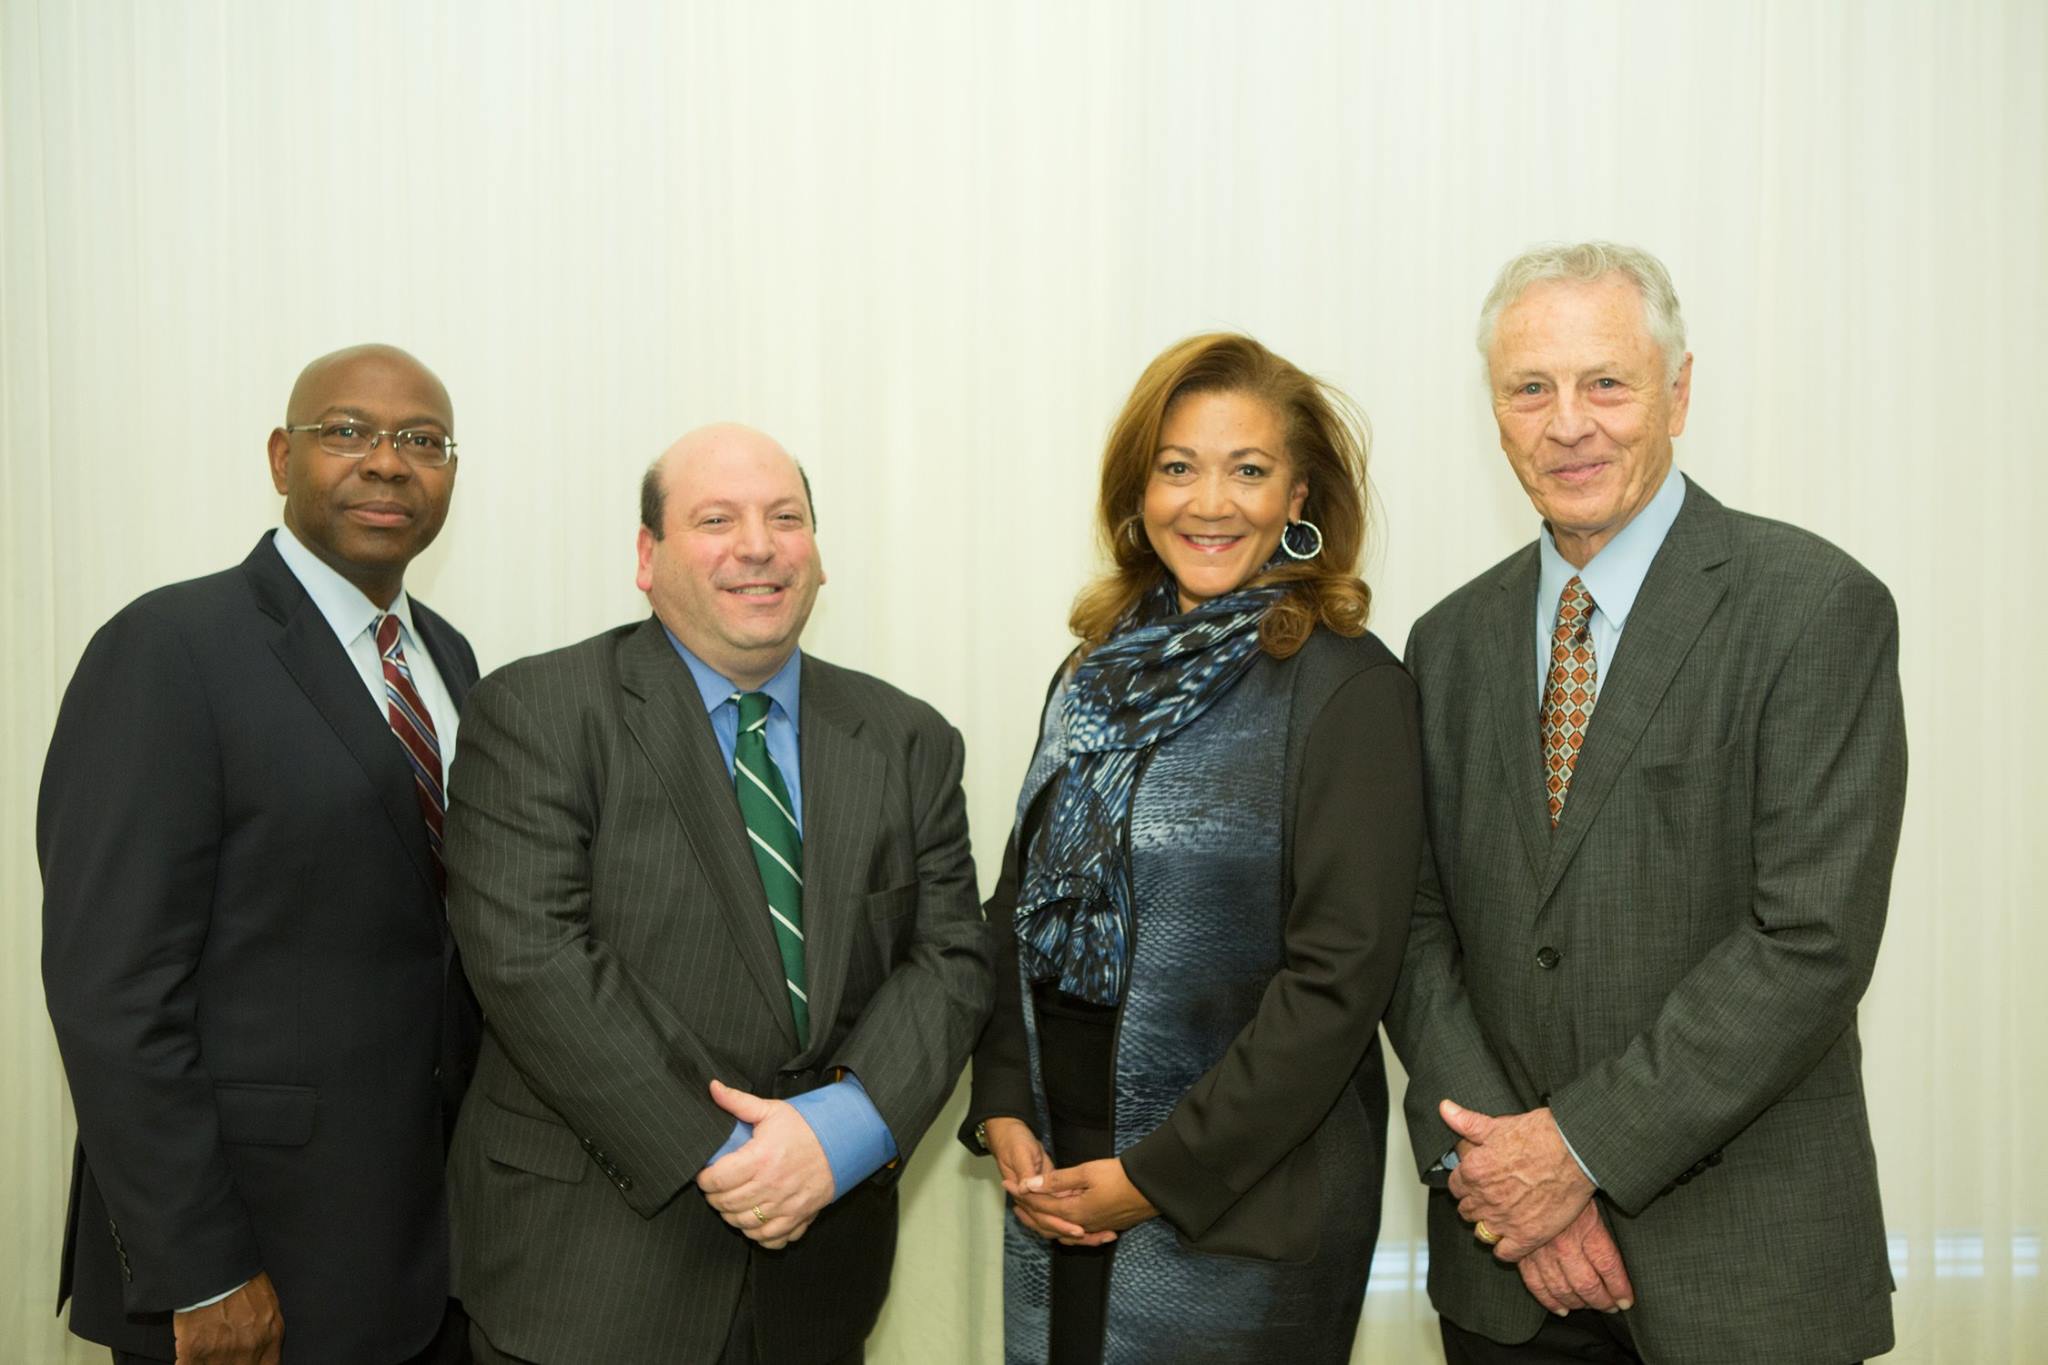 (L to r) Jason Riley, Lesley President Jeff Weiss, Michele Norris and Morris Dees gather before the lecture.